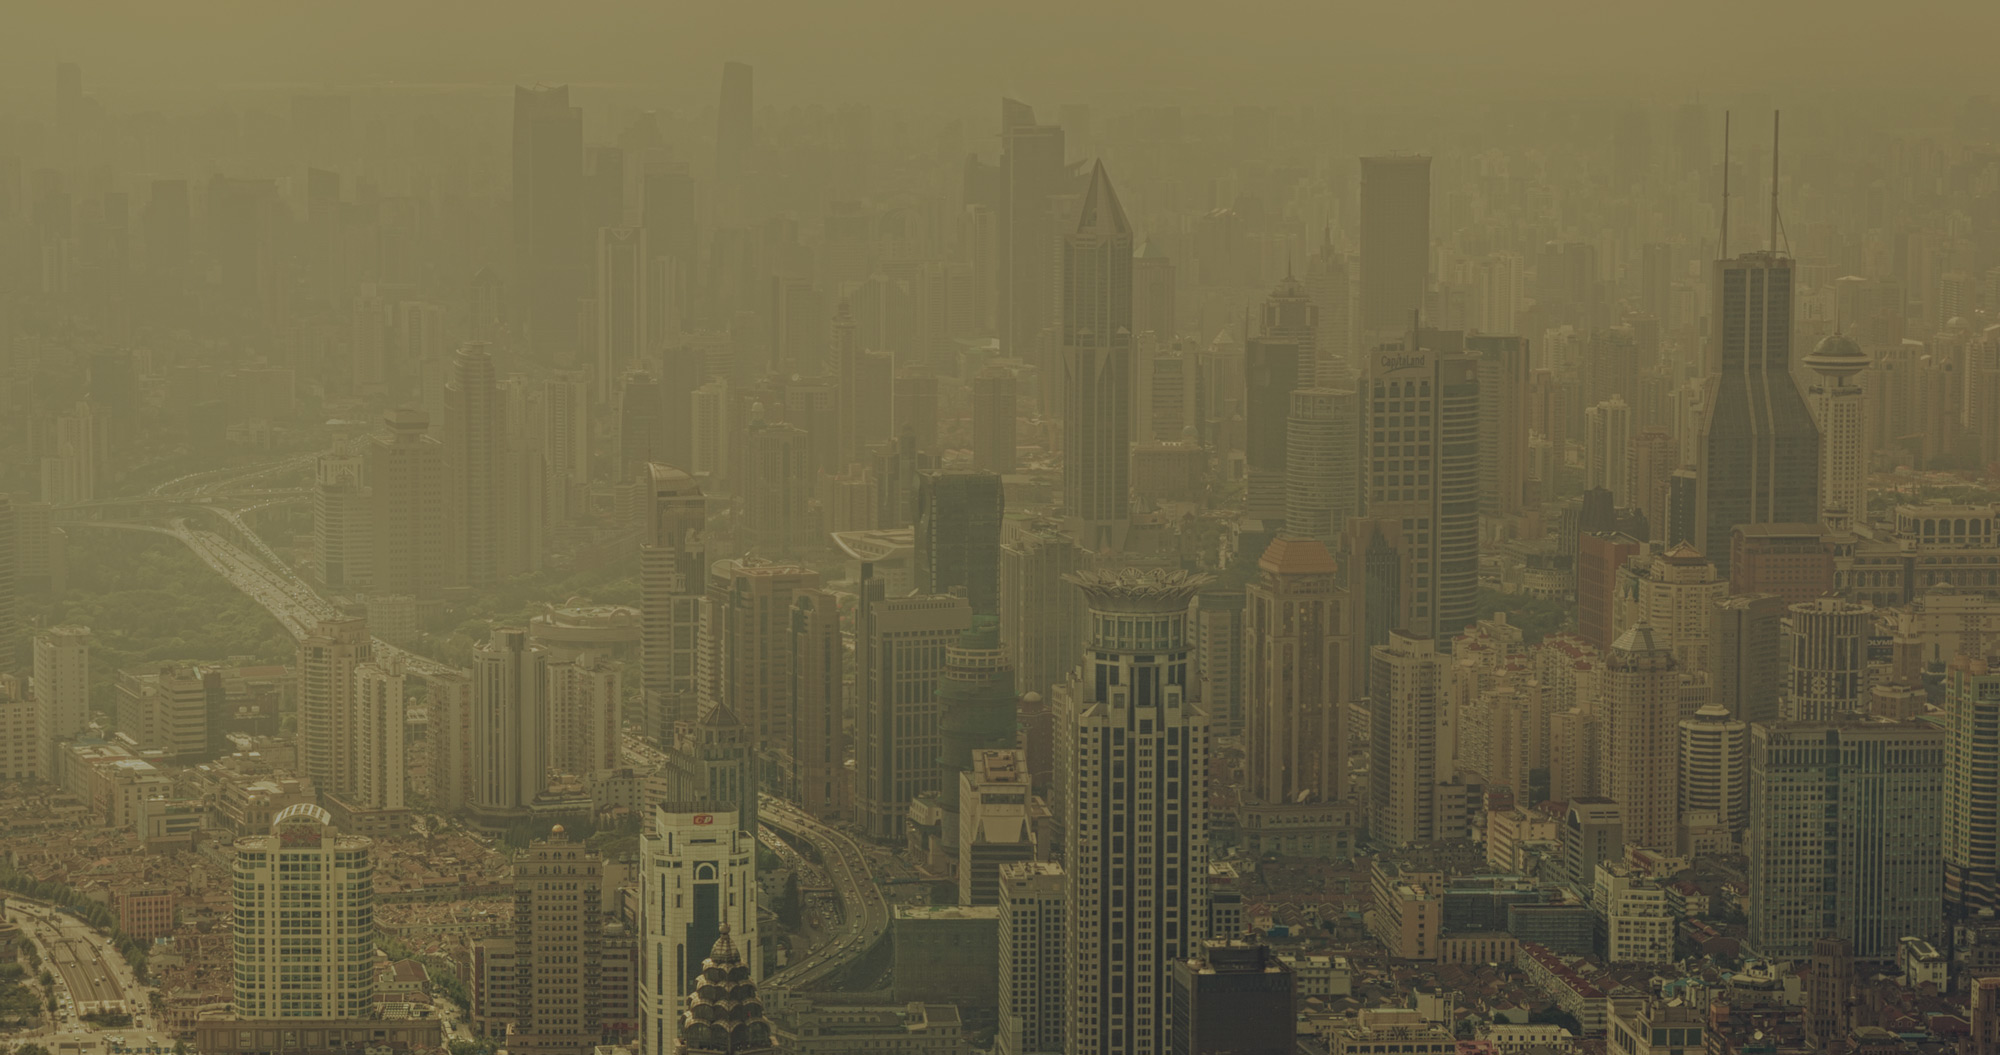 Is Air Quality in China a Social Problem?